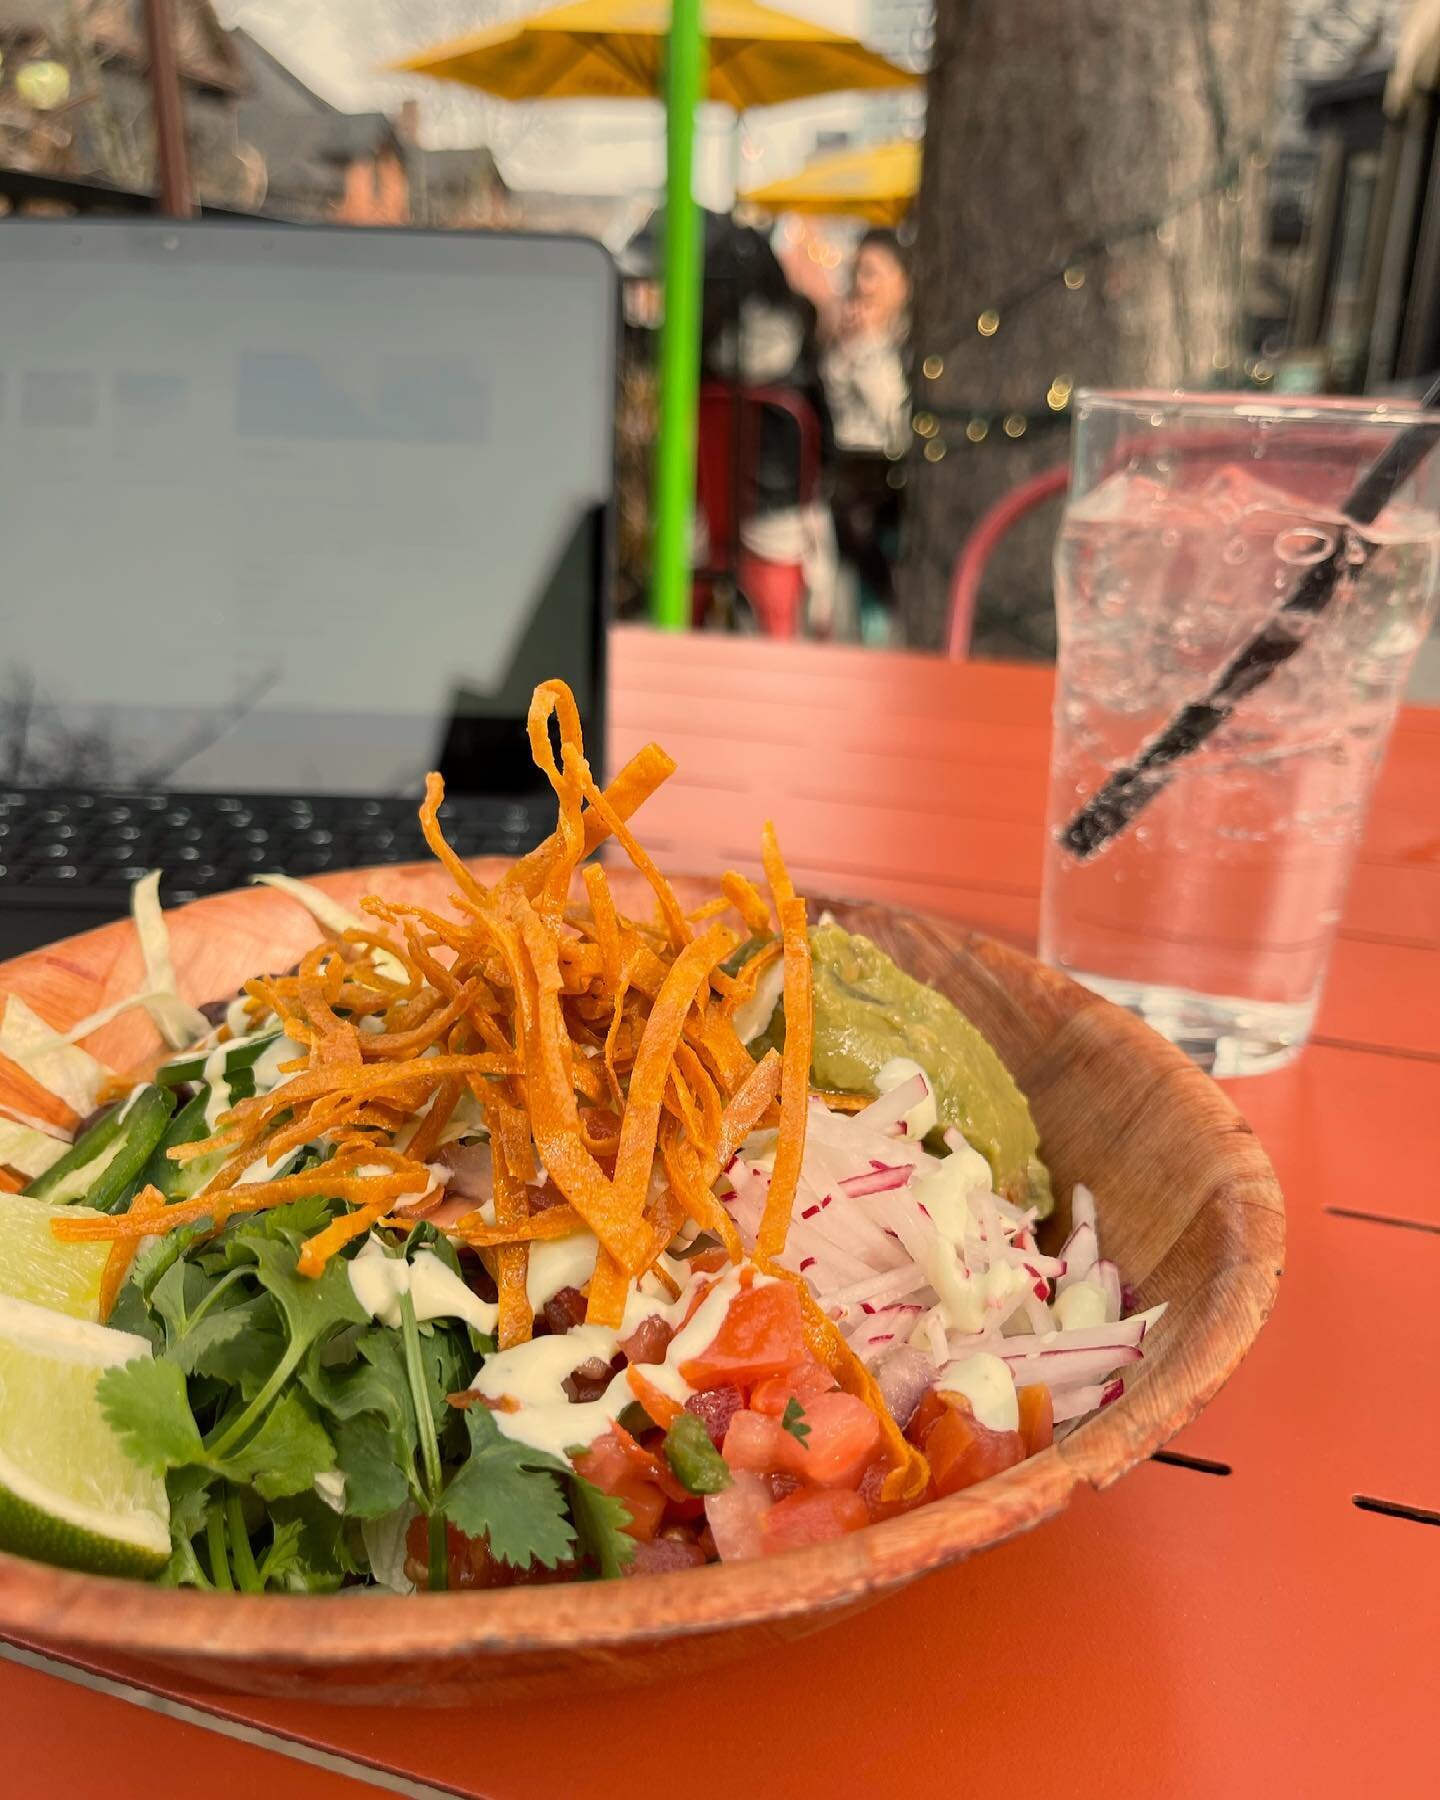 Who says your office can&rsquo;t be on a sunny patio? 😎**No you can&rsquo;t use our printer 😉